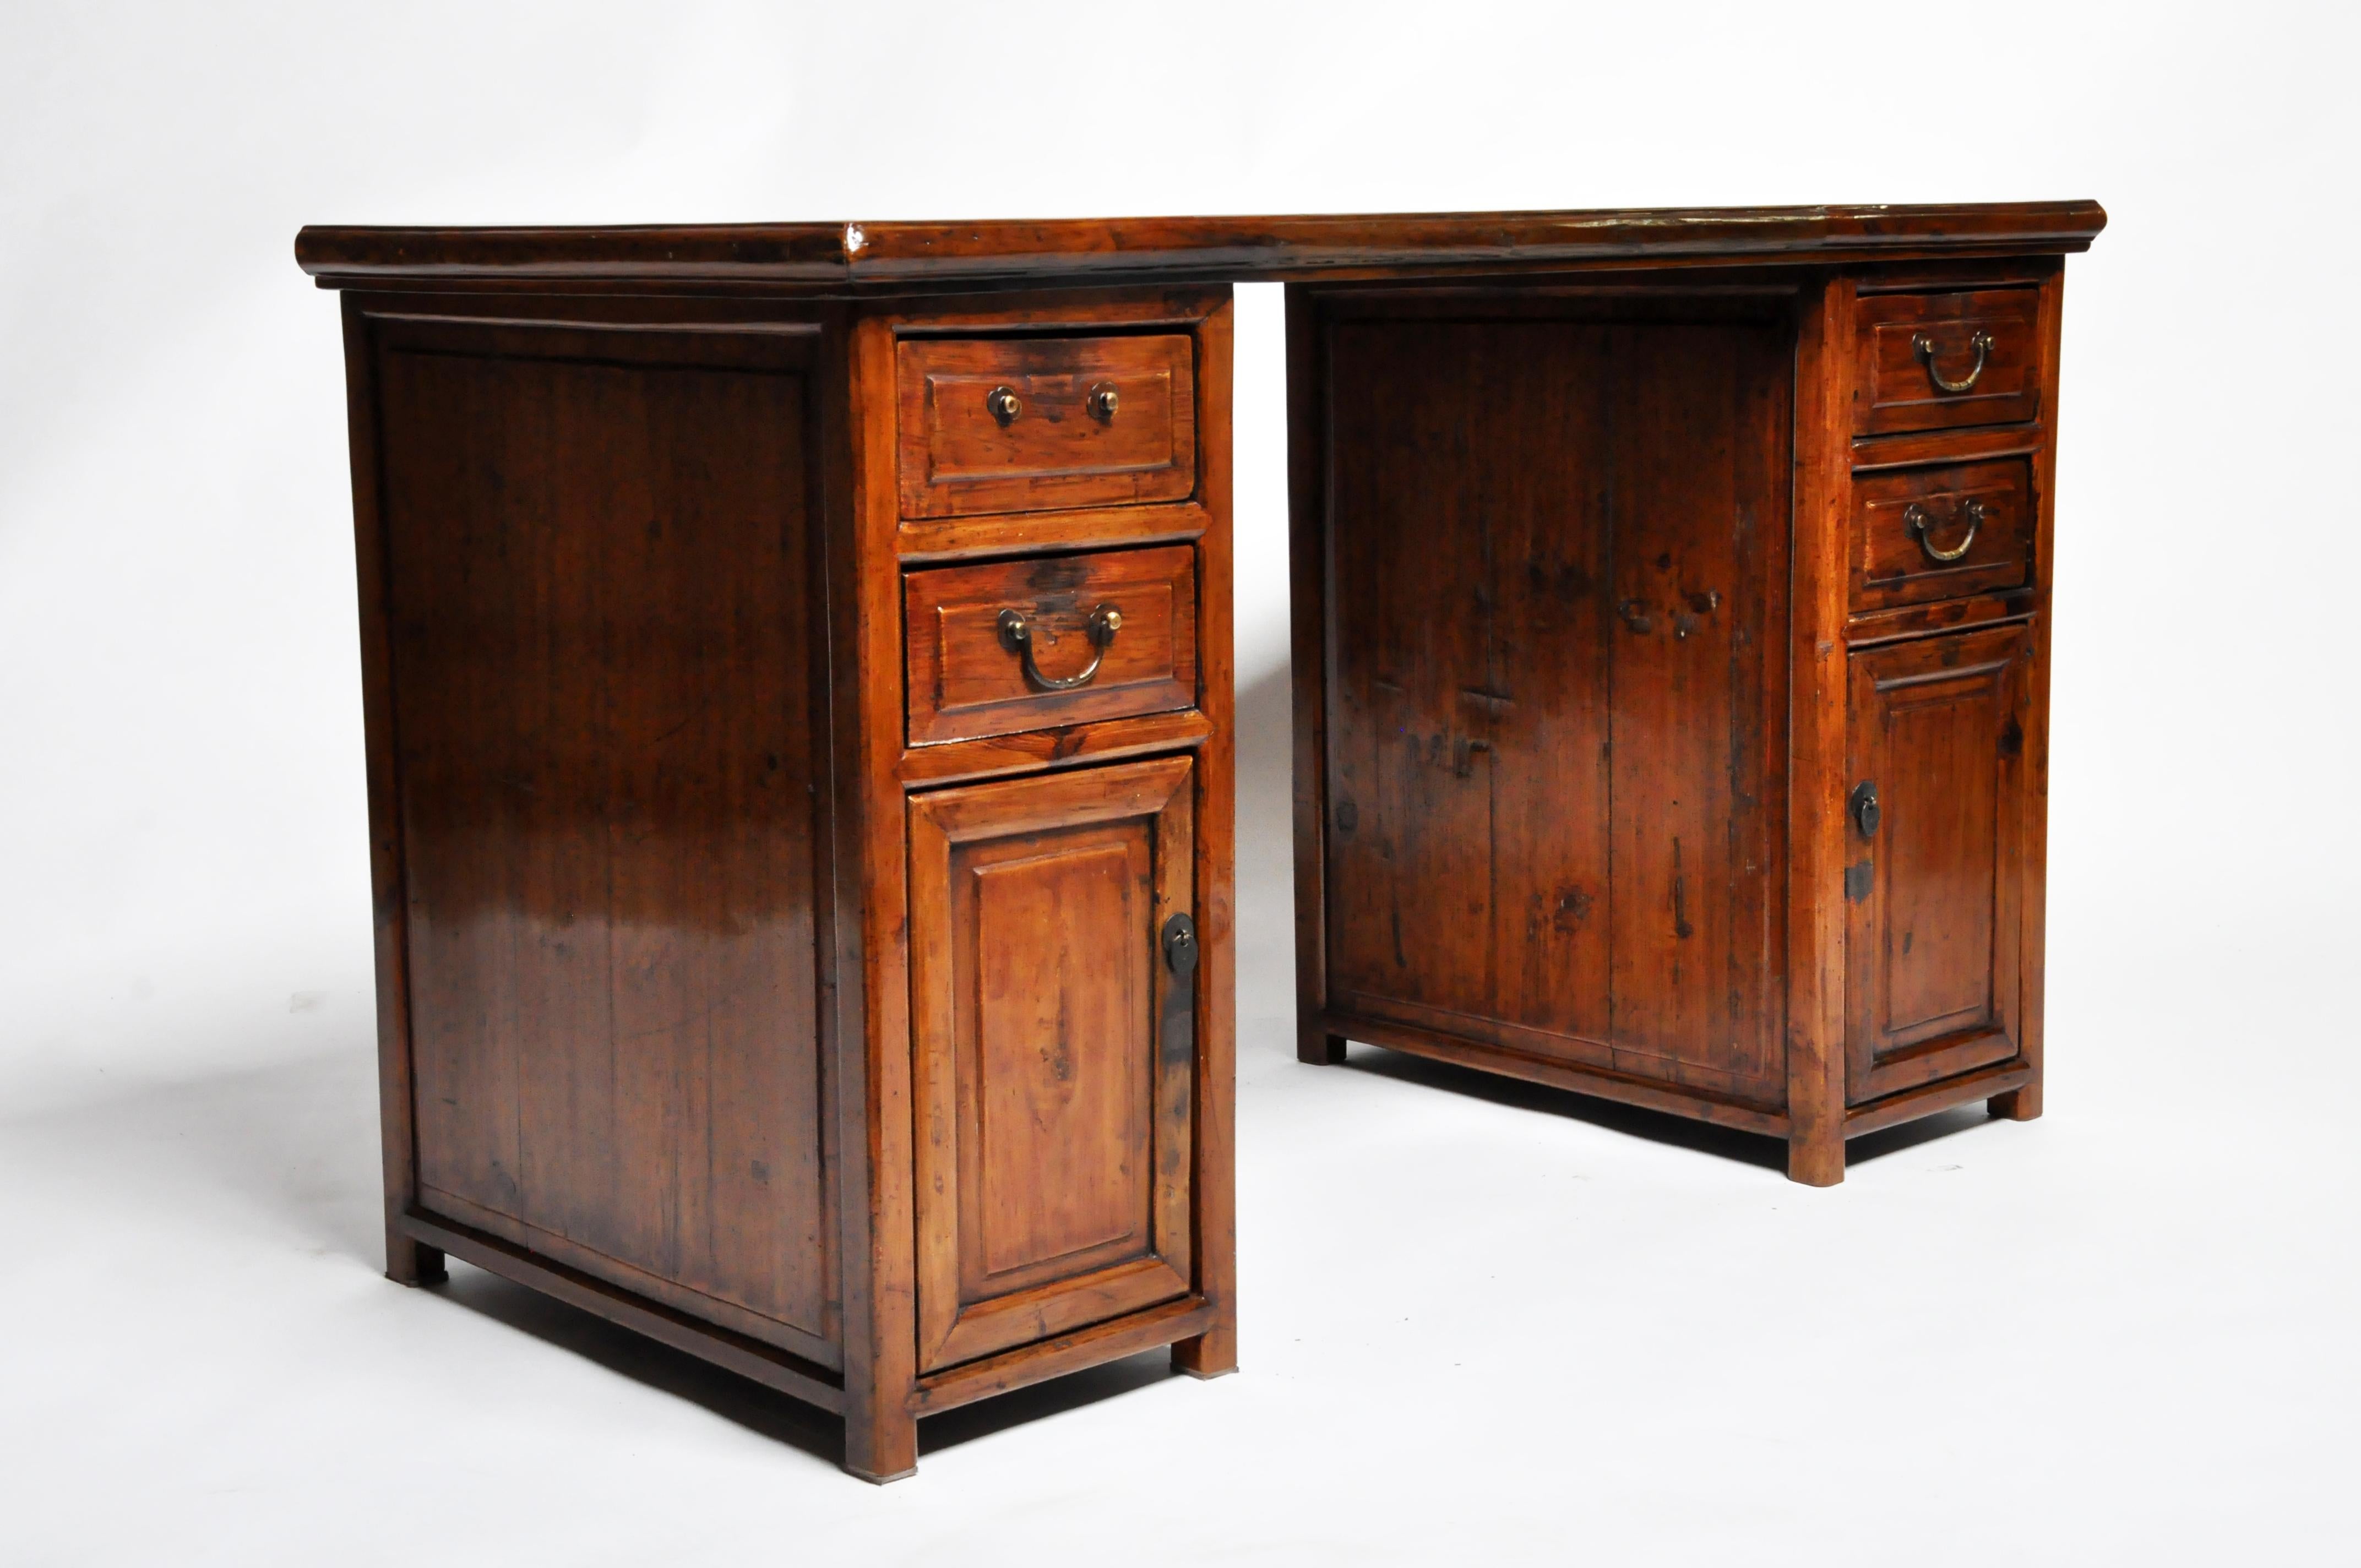 Thai British Colonial Wooden Desk with Four Drawers and Two Doors